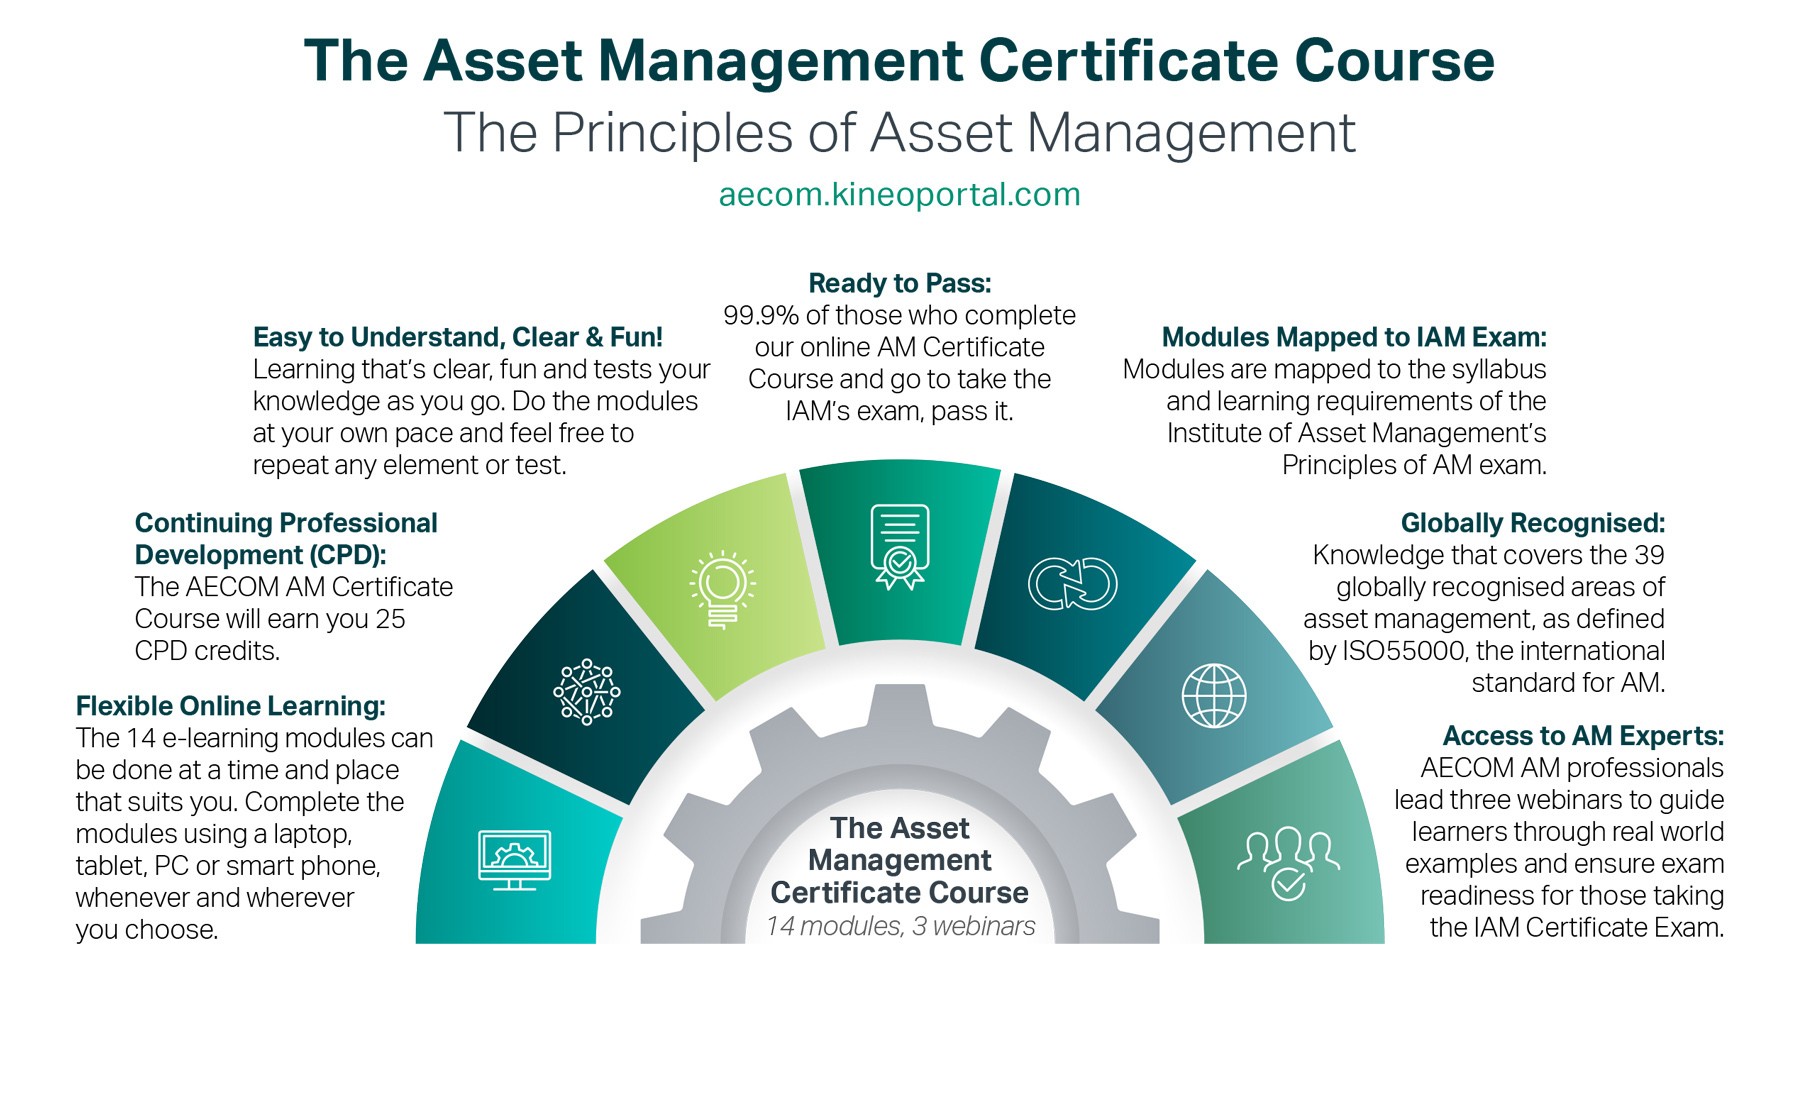 The Asset Management Certificate Course